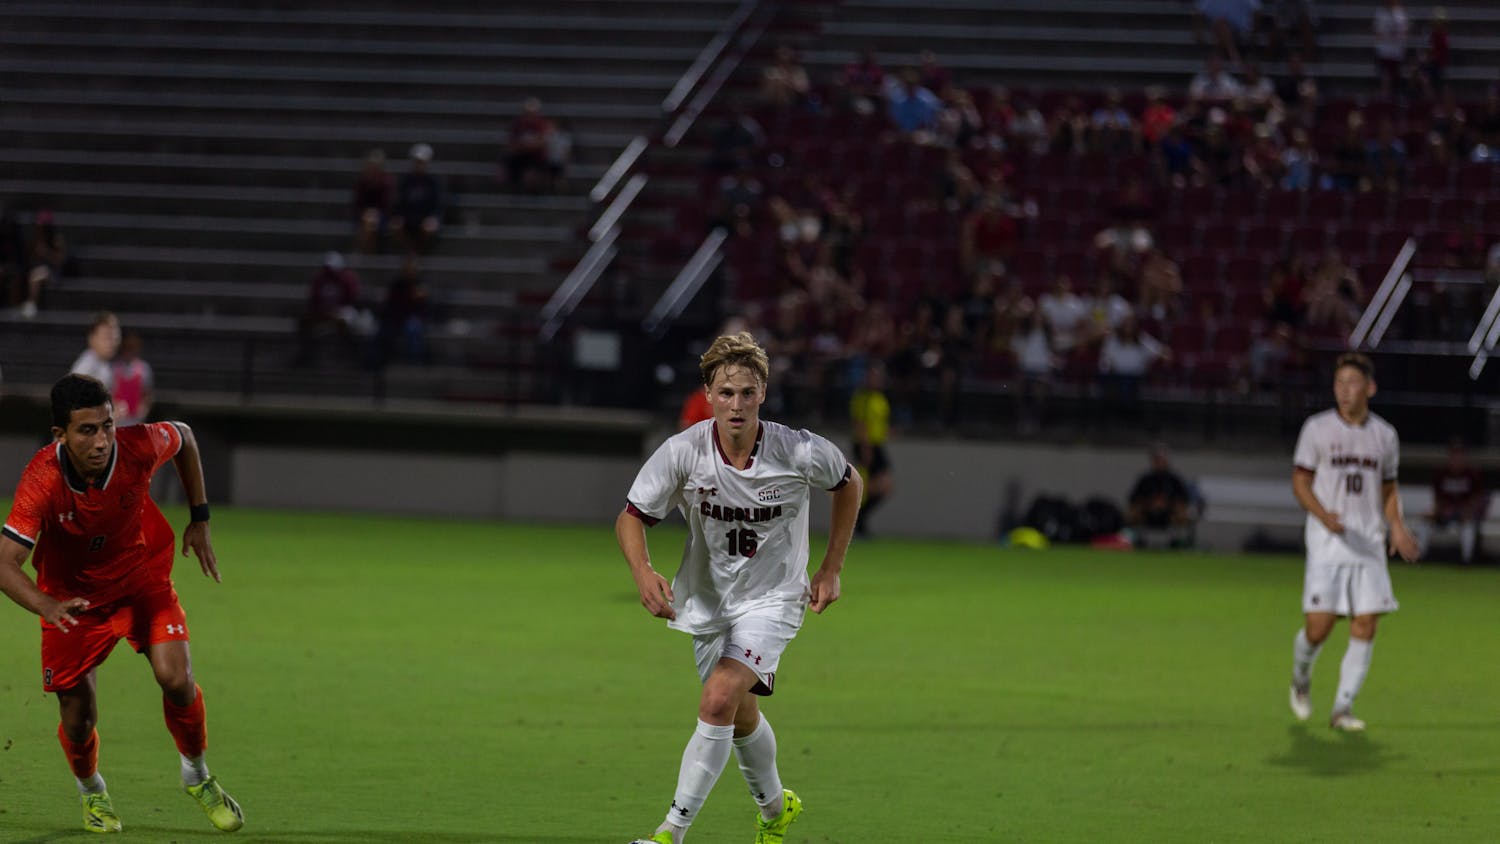 The South Carolina men's soccer team used a strong first half and defensive effort to shutout Campbell 1-0 on Saturday, Sept. 17.&nbsp;